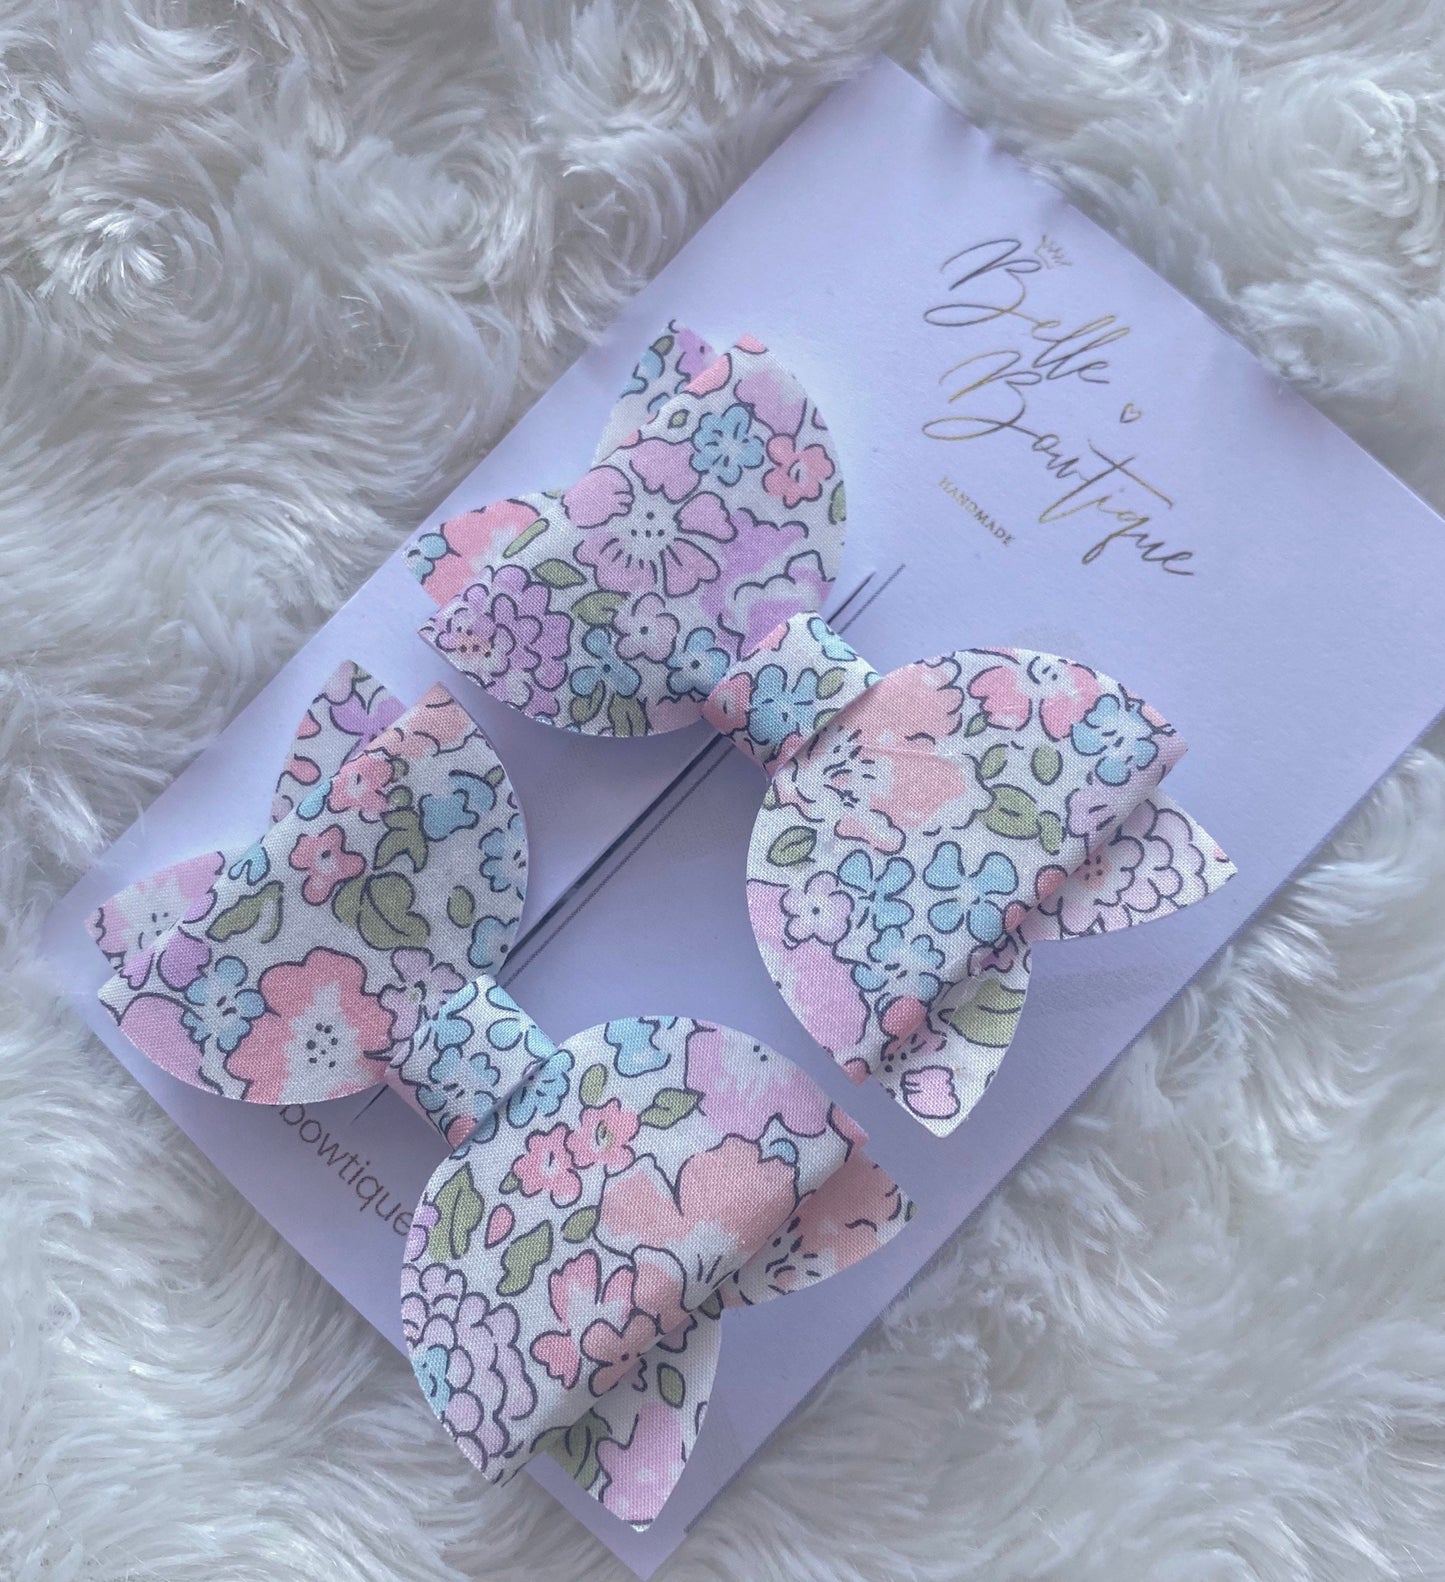 Girls Hair Clip Barrette Pair Fringe Bow Clips Floral Flower Liberty London Fabric Clip Pastel pinks Liberty Tana Lawn - Mini pair of bows